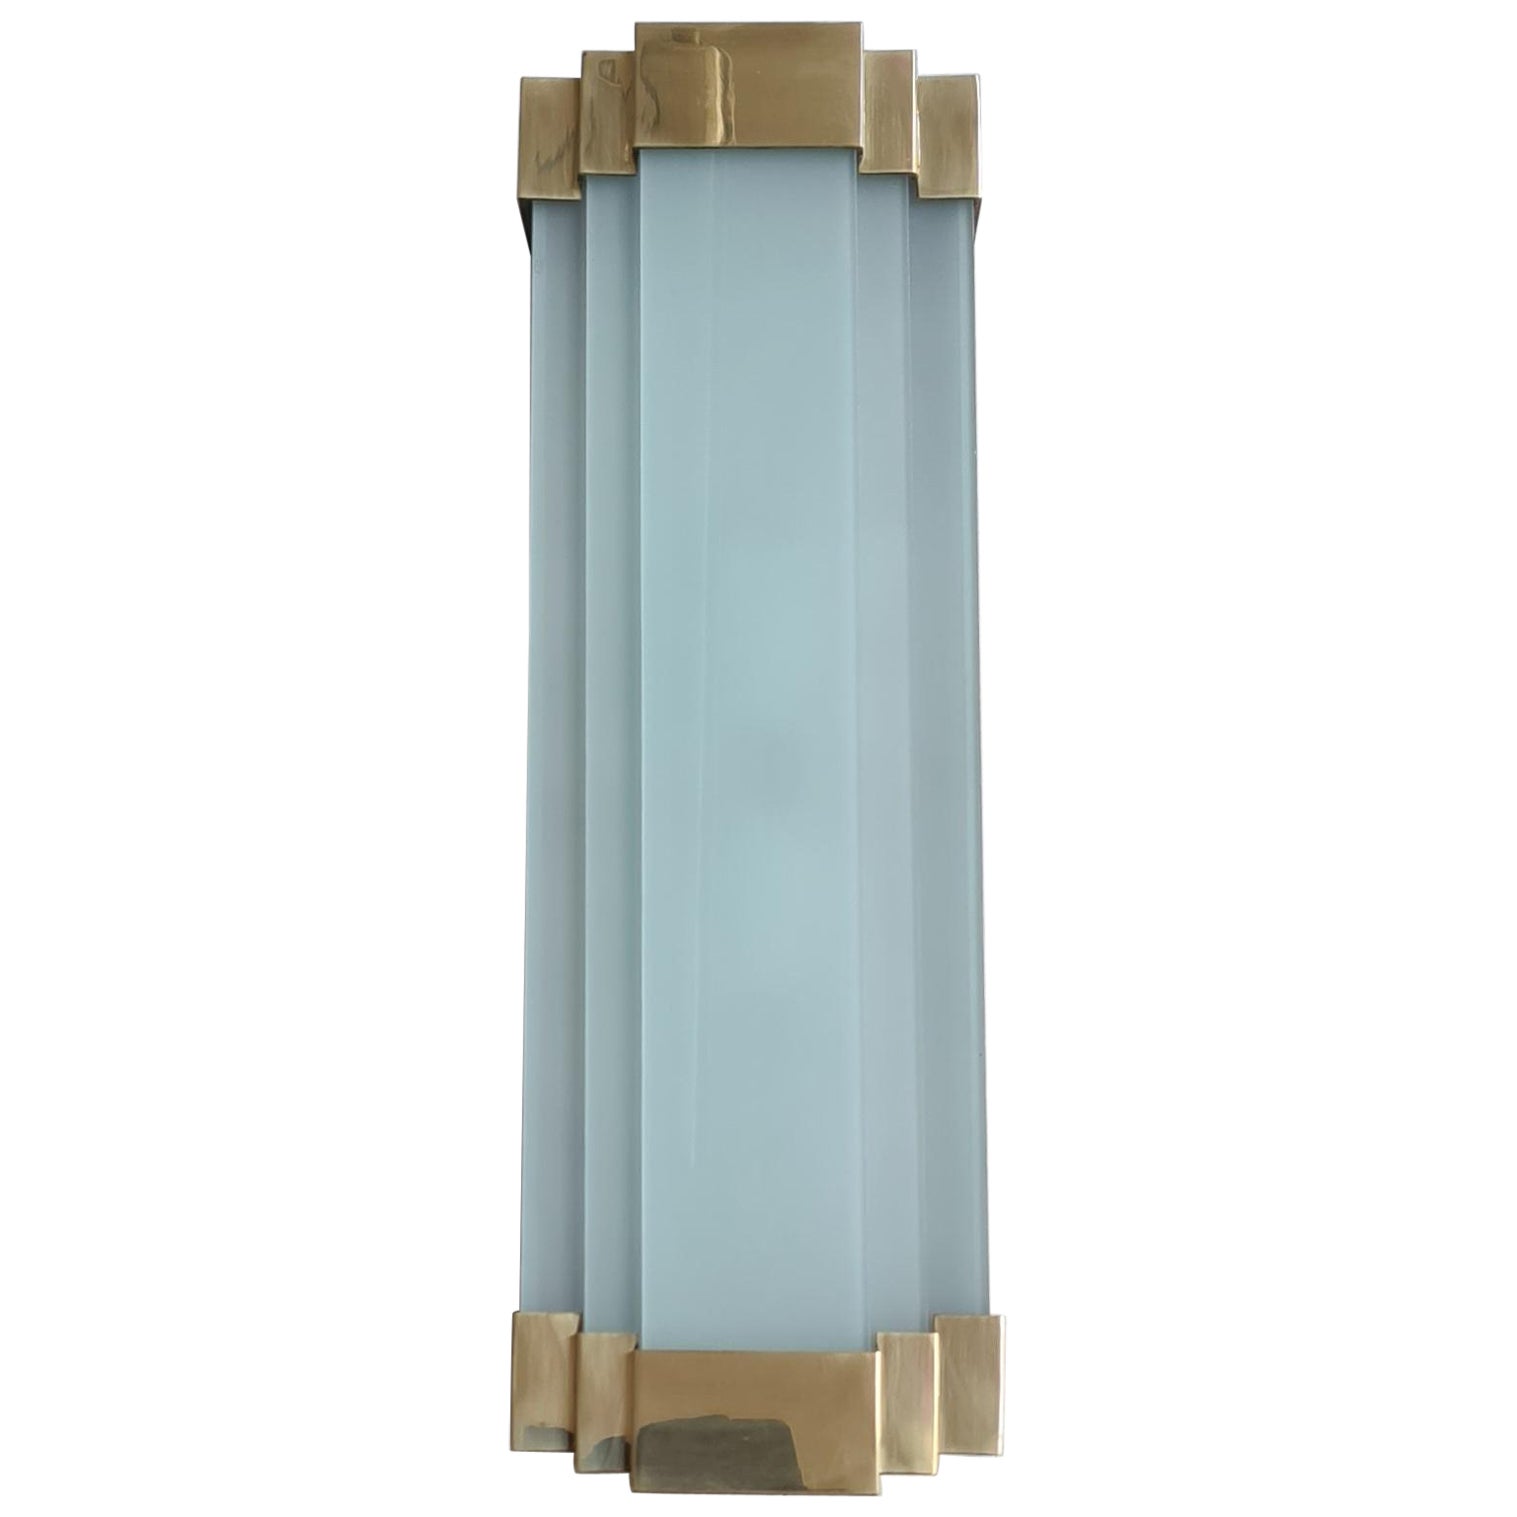 French Bronze Art Deco Modernist Sconce with Gold Finish